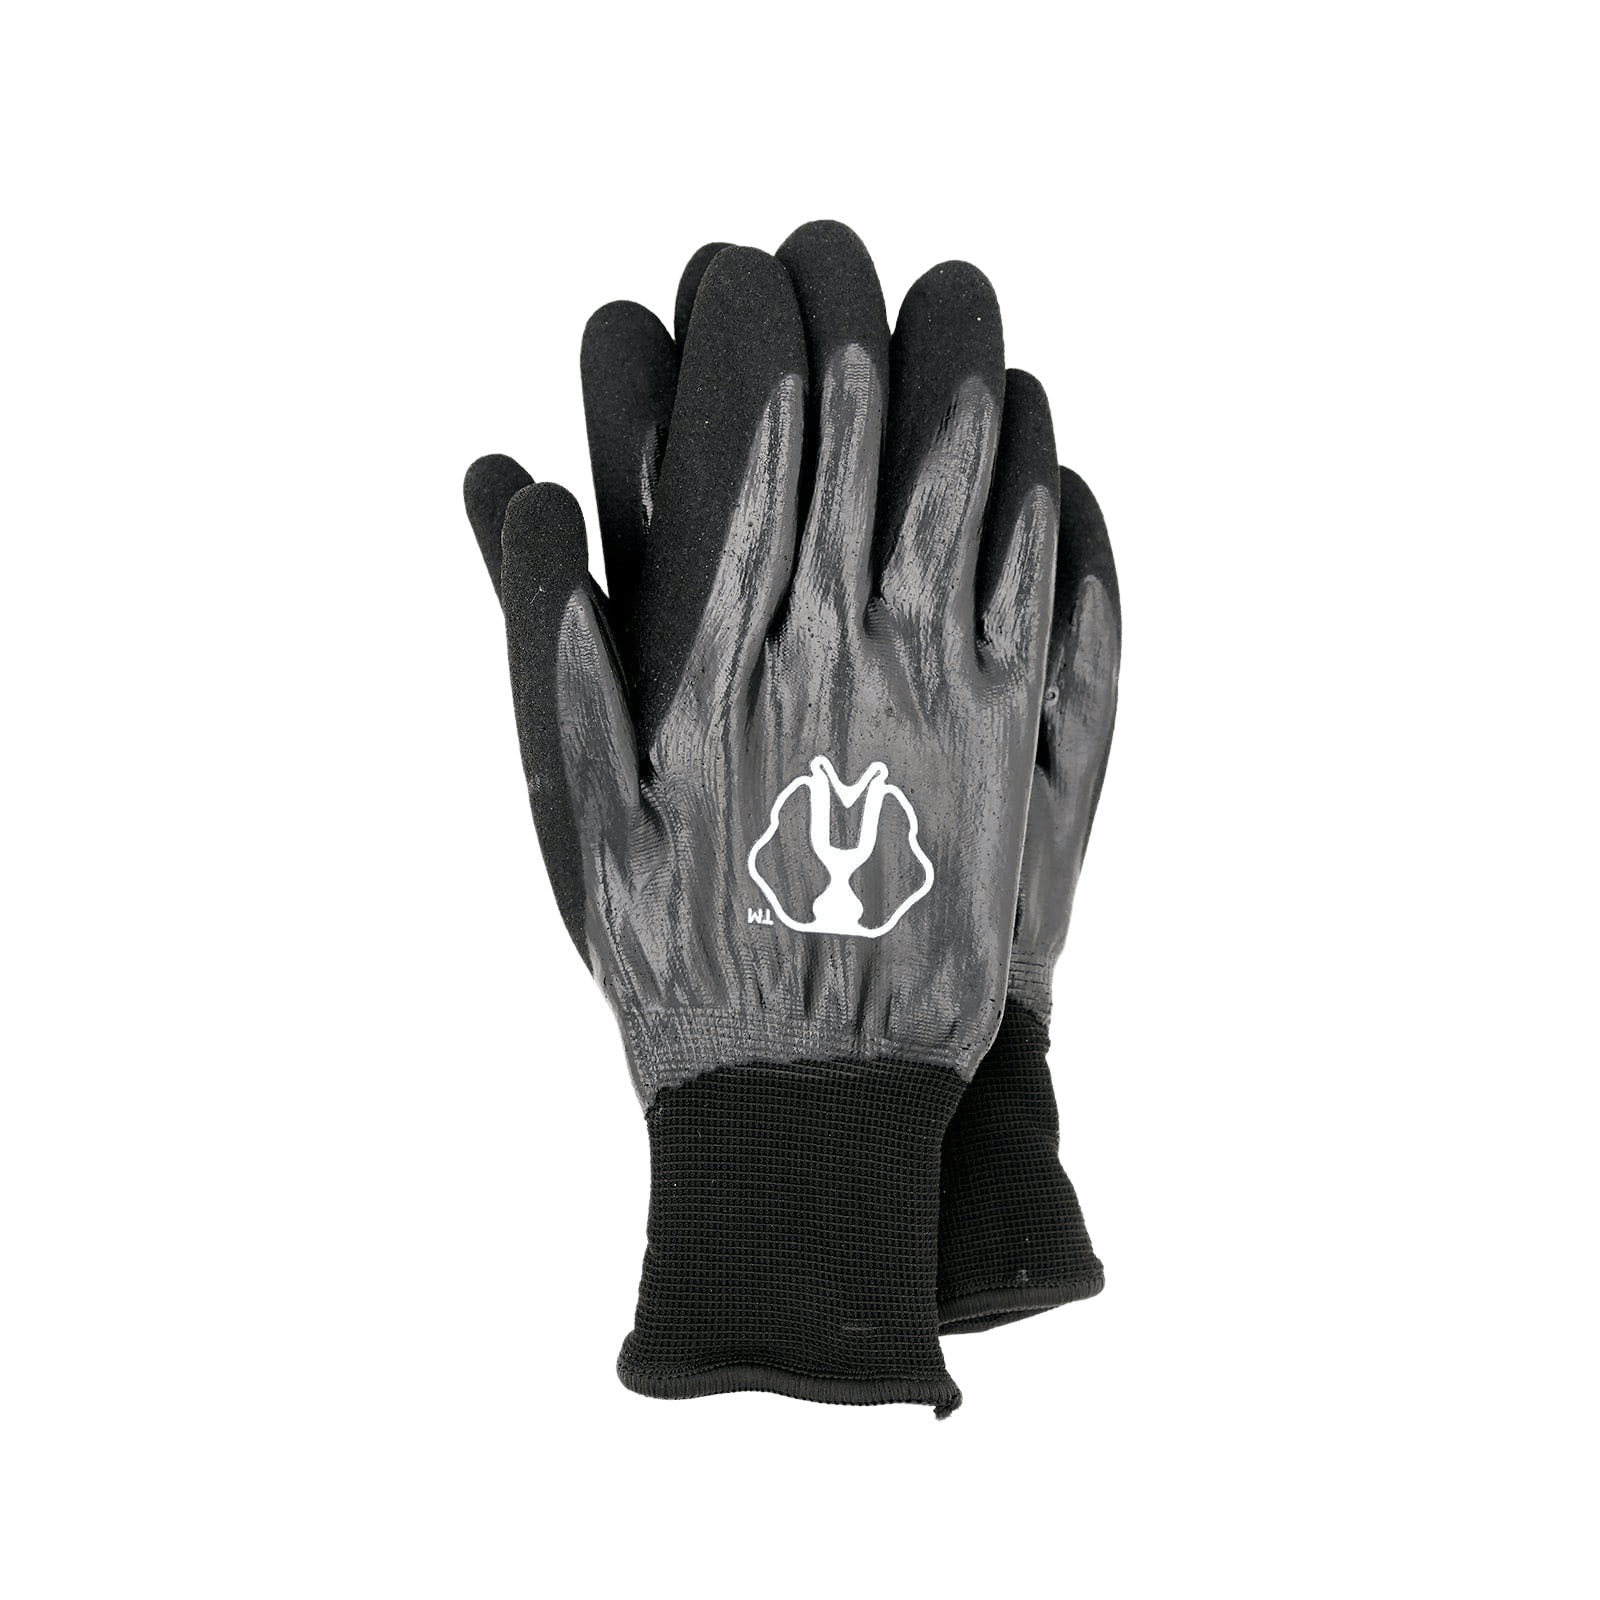 Insulated/Waterproof Cold Weather Gloves